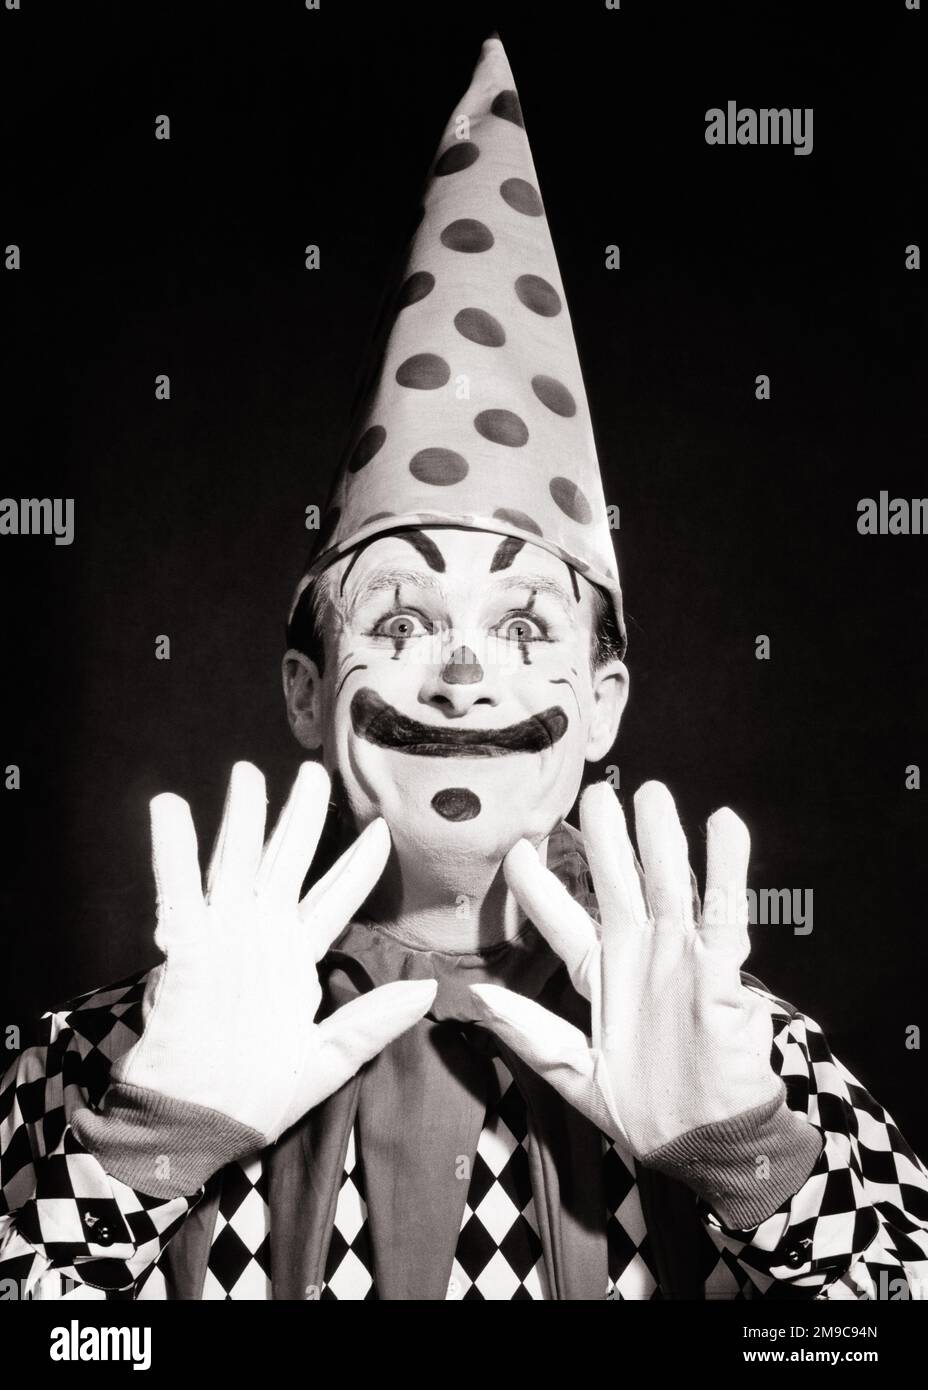 1950s 1960s SMILING FUNNY FACE CLOWN WEARING POLKA DOT DUNCE CAP RAISED HANDS IN WHITE GLOVES  - c3085 DEB001 HARS RAISED PLEASED JOY LIFESTYLE JOBS STUDIO SHOT COPY SPACE PERSONS CHARACTER MALES B&W DUNCE WIDE CLOWNS EYE CONTACT BIZARRE DOT SKILL BUG-EYED HUMOROUS OCCUPATION HAPPINESS SKILLS WEIRD HEAD AND SHOULDERS CHEERFUL PERFORMER POLKA GROTESQUE EXCITEMENT MAKE UP ZANY COMICAL UNCONVENTIONAL ENTERTAINER OCCUPATIONS SMILES COULROPHOBIA CONCEPTUAL COMEDY JESTER JOYFUL WACKY DEB001 IDIOSYNCRATIC WIDE-EYED AMUSING CREATIVITY ECCENTRIC STARTLED YOUNG ADULT MAN BLACK AND WHITE Stock Photo